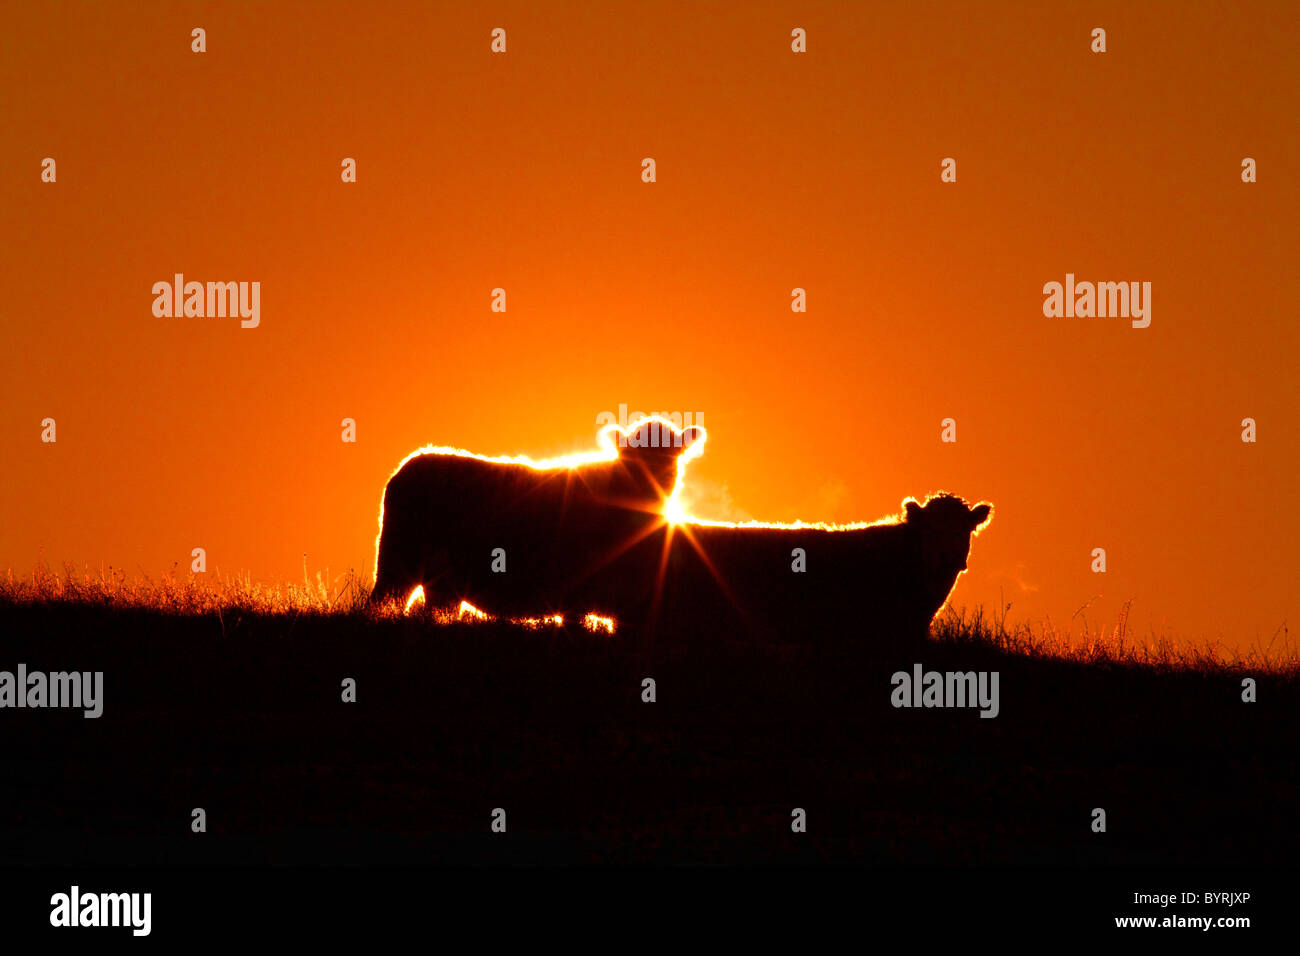 Livestock - Beef cattle on a ridgeline silhouetted by the sunset / Alberta, Canada. Stock Photo